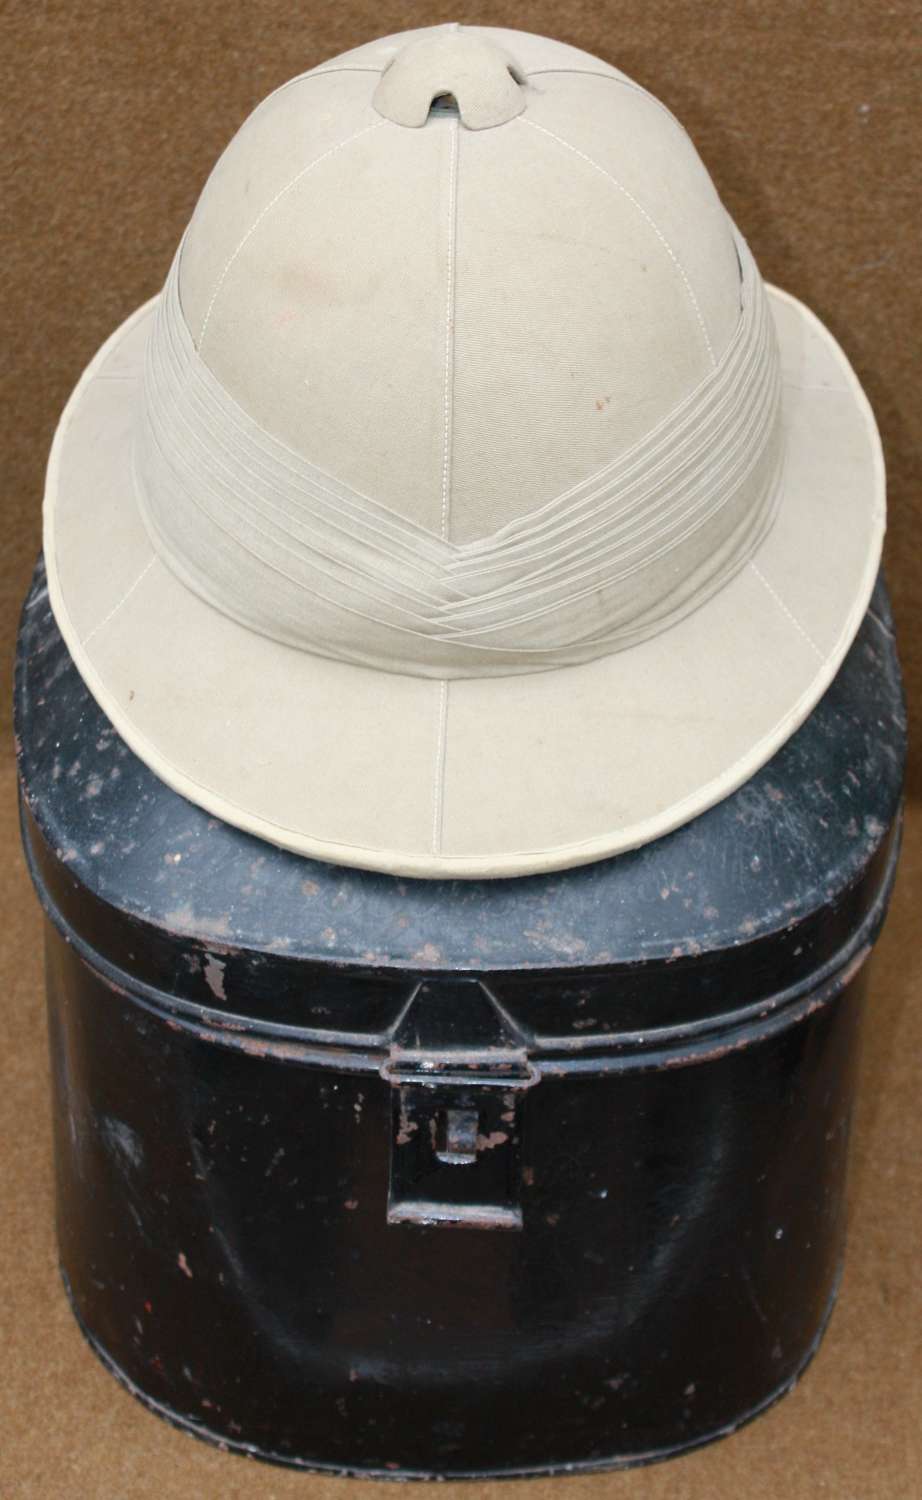 A VERY GOOD LATE 1930'S PERIOD EARLY WWII SOLAR HELMET AND TIN NAMED